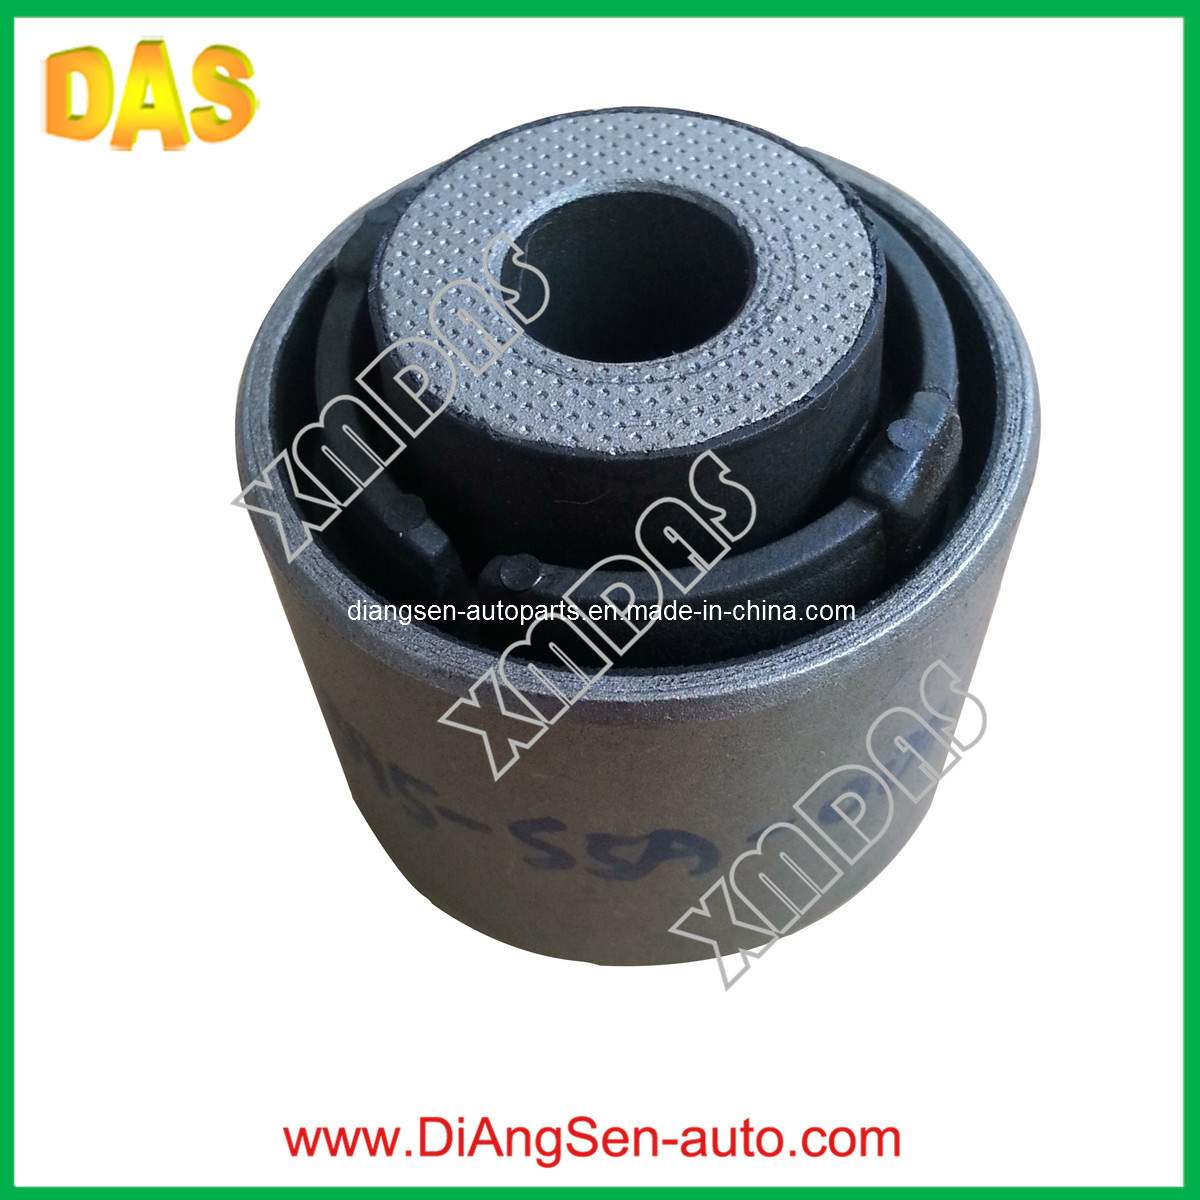 Customized Wholesale Auto Rubber Arm Bushing for Honda (52395-S5a-004)